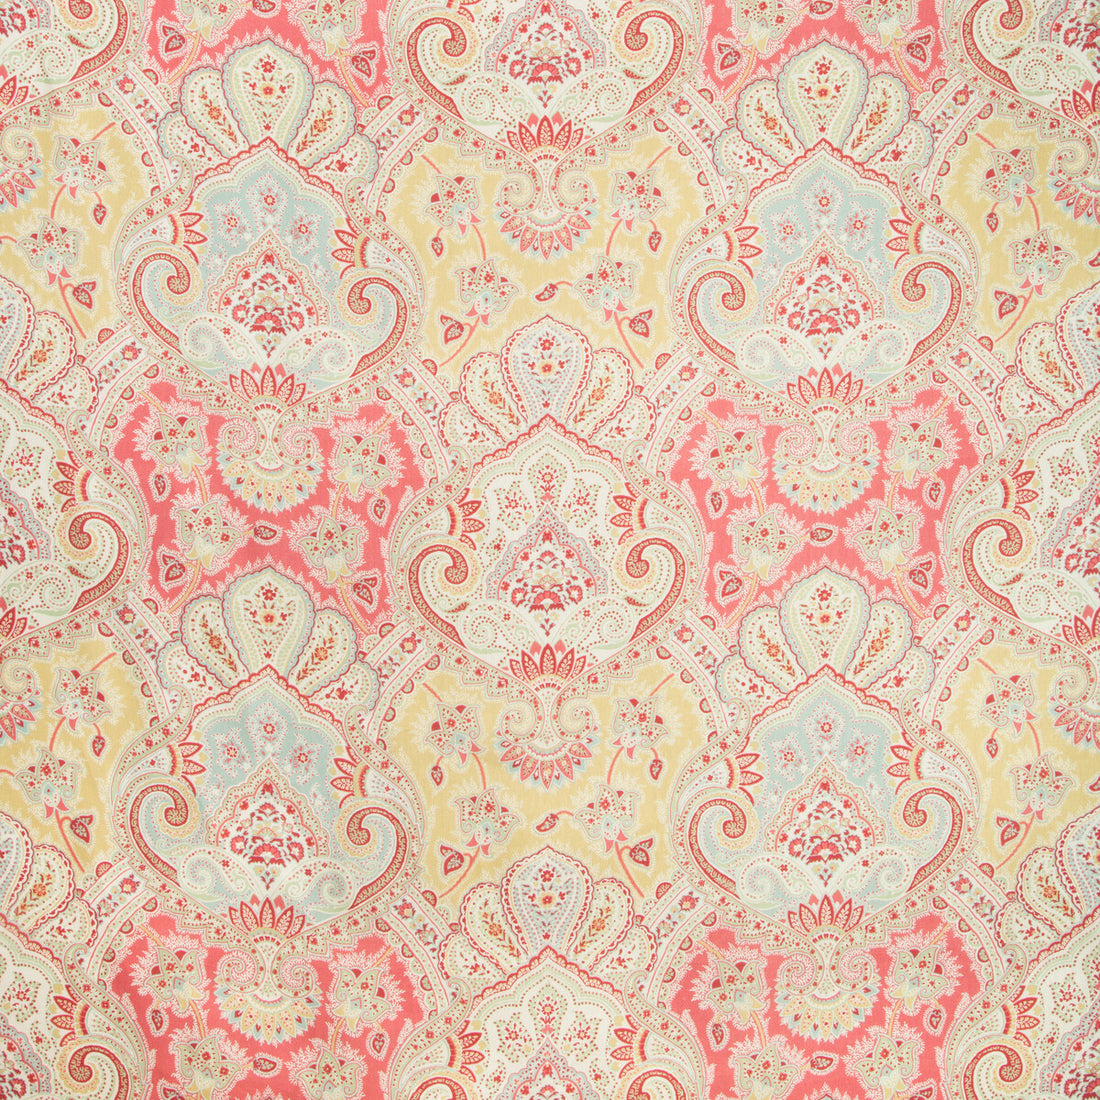 Echocyprus fabric in festival color - pattern ECHOCYPRUS.419.0 - by Kravet Basics in the Echo Greenwich collection